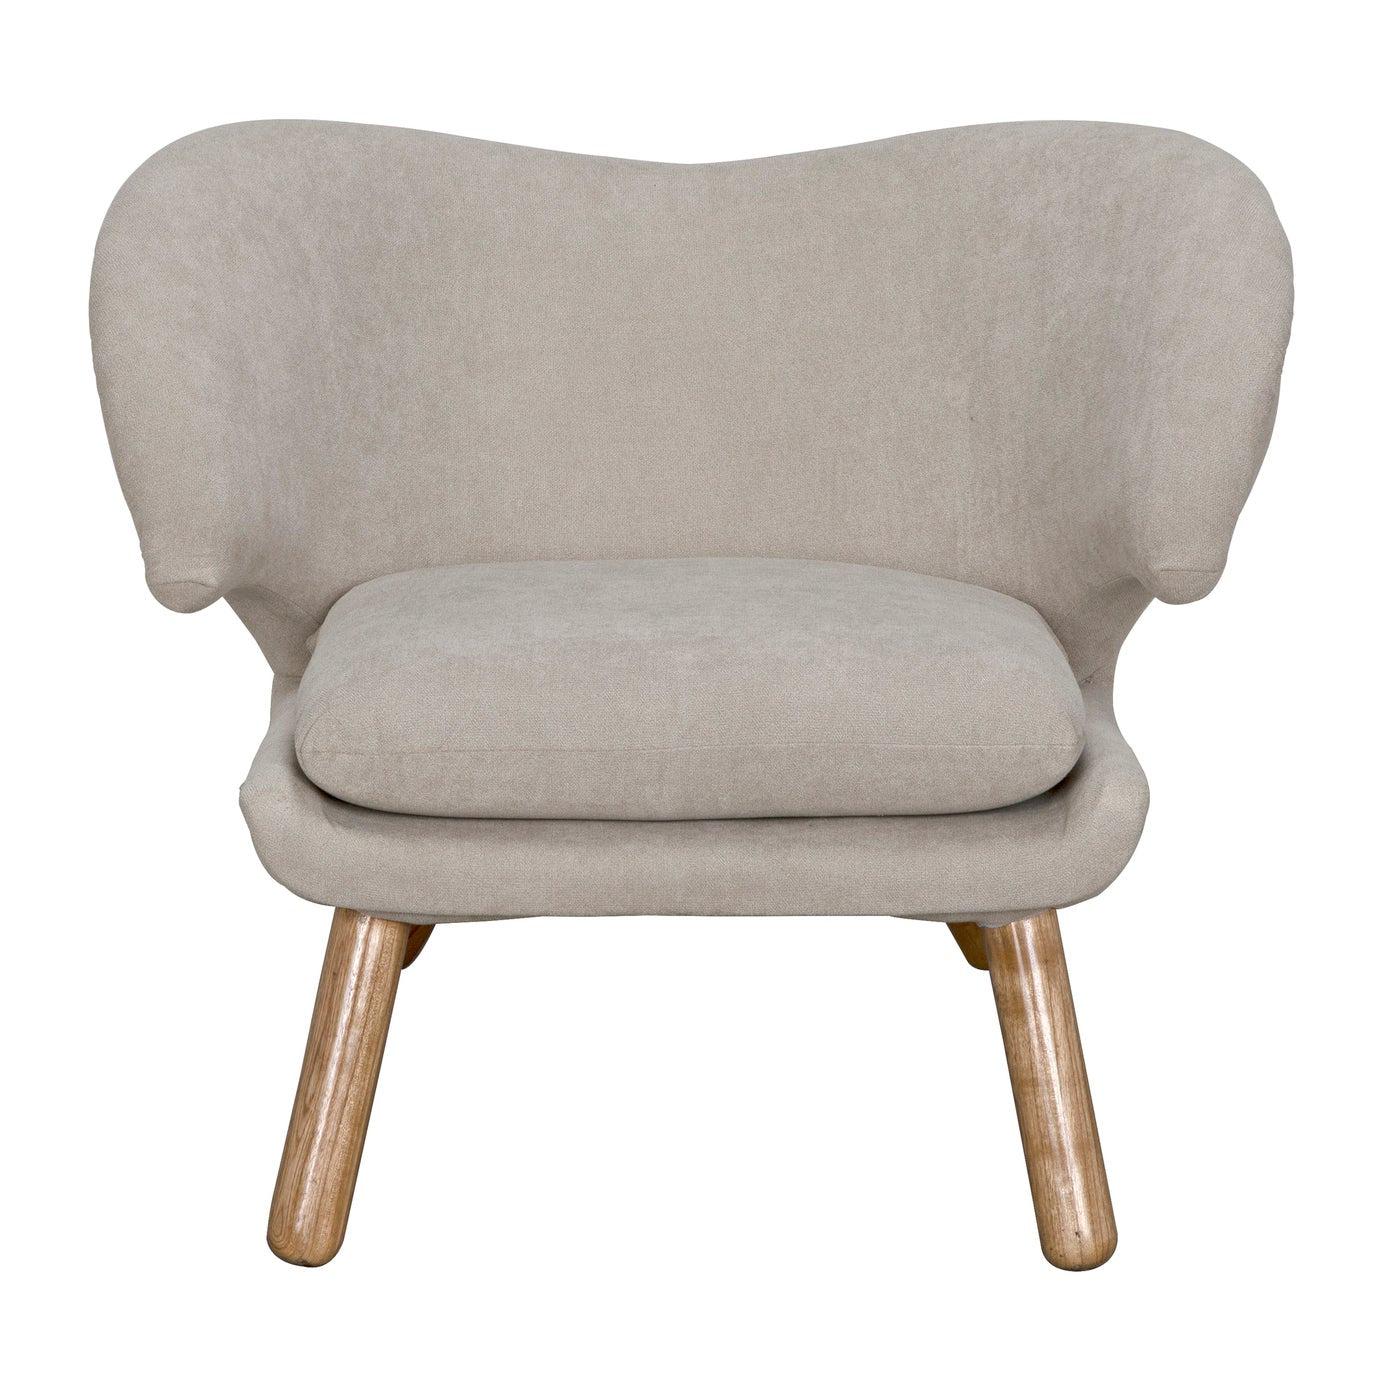 Valerie Chair with Wheat Fabric